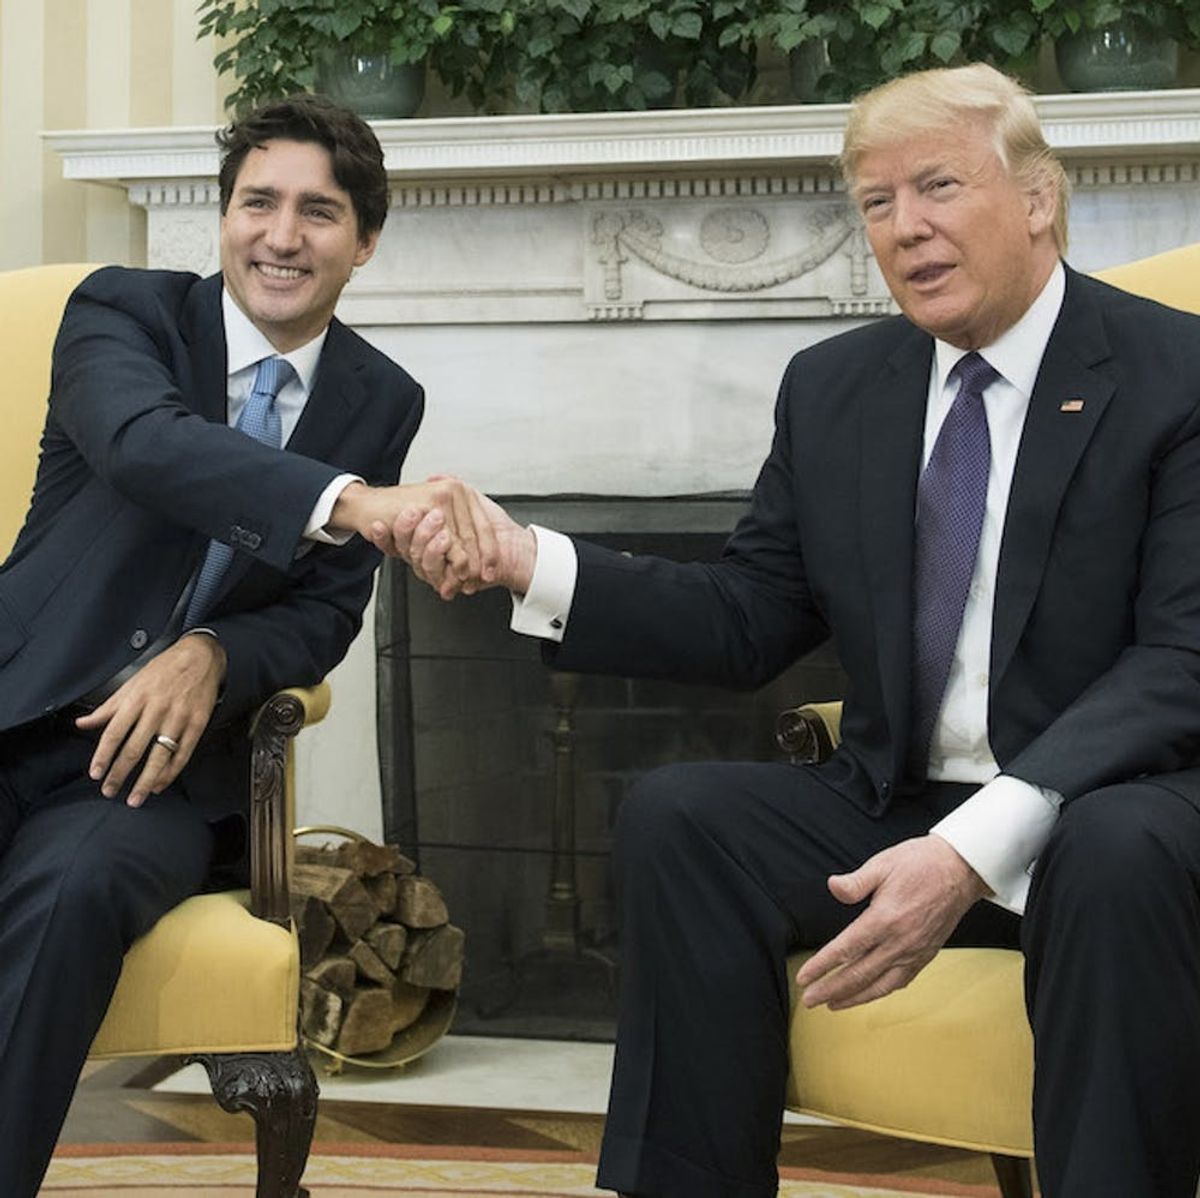 Is Canada’s Justin Trudeau Turning Trump into a Feminist President?